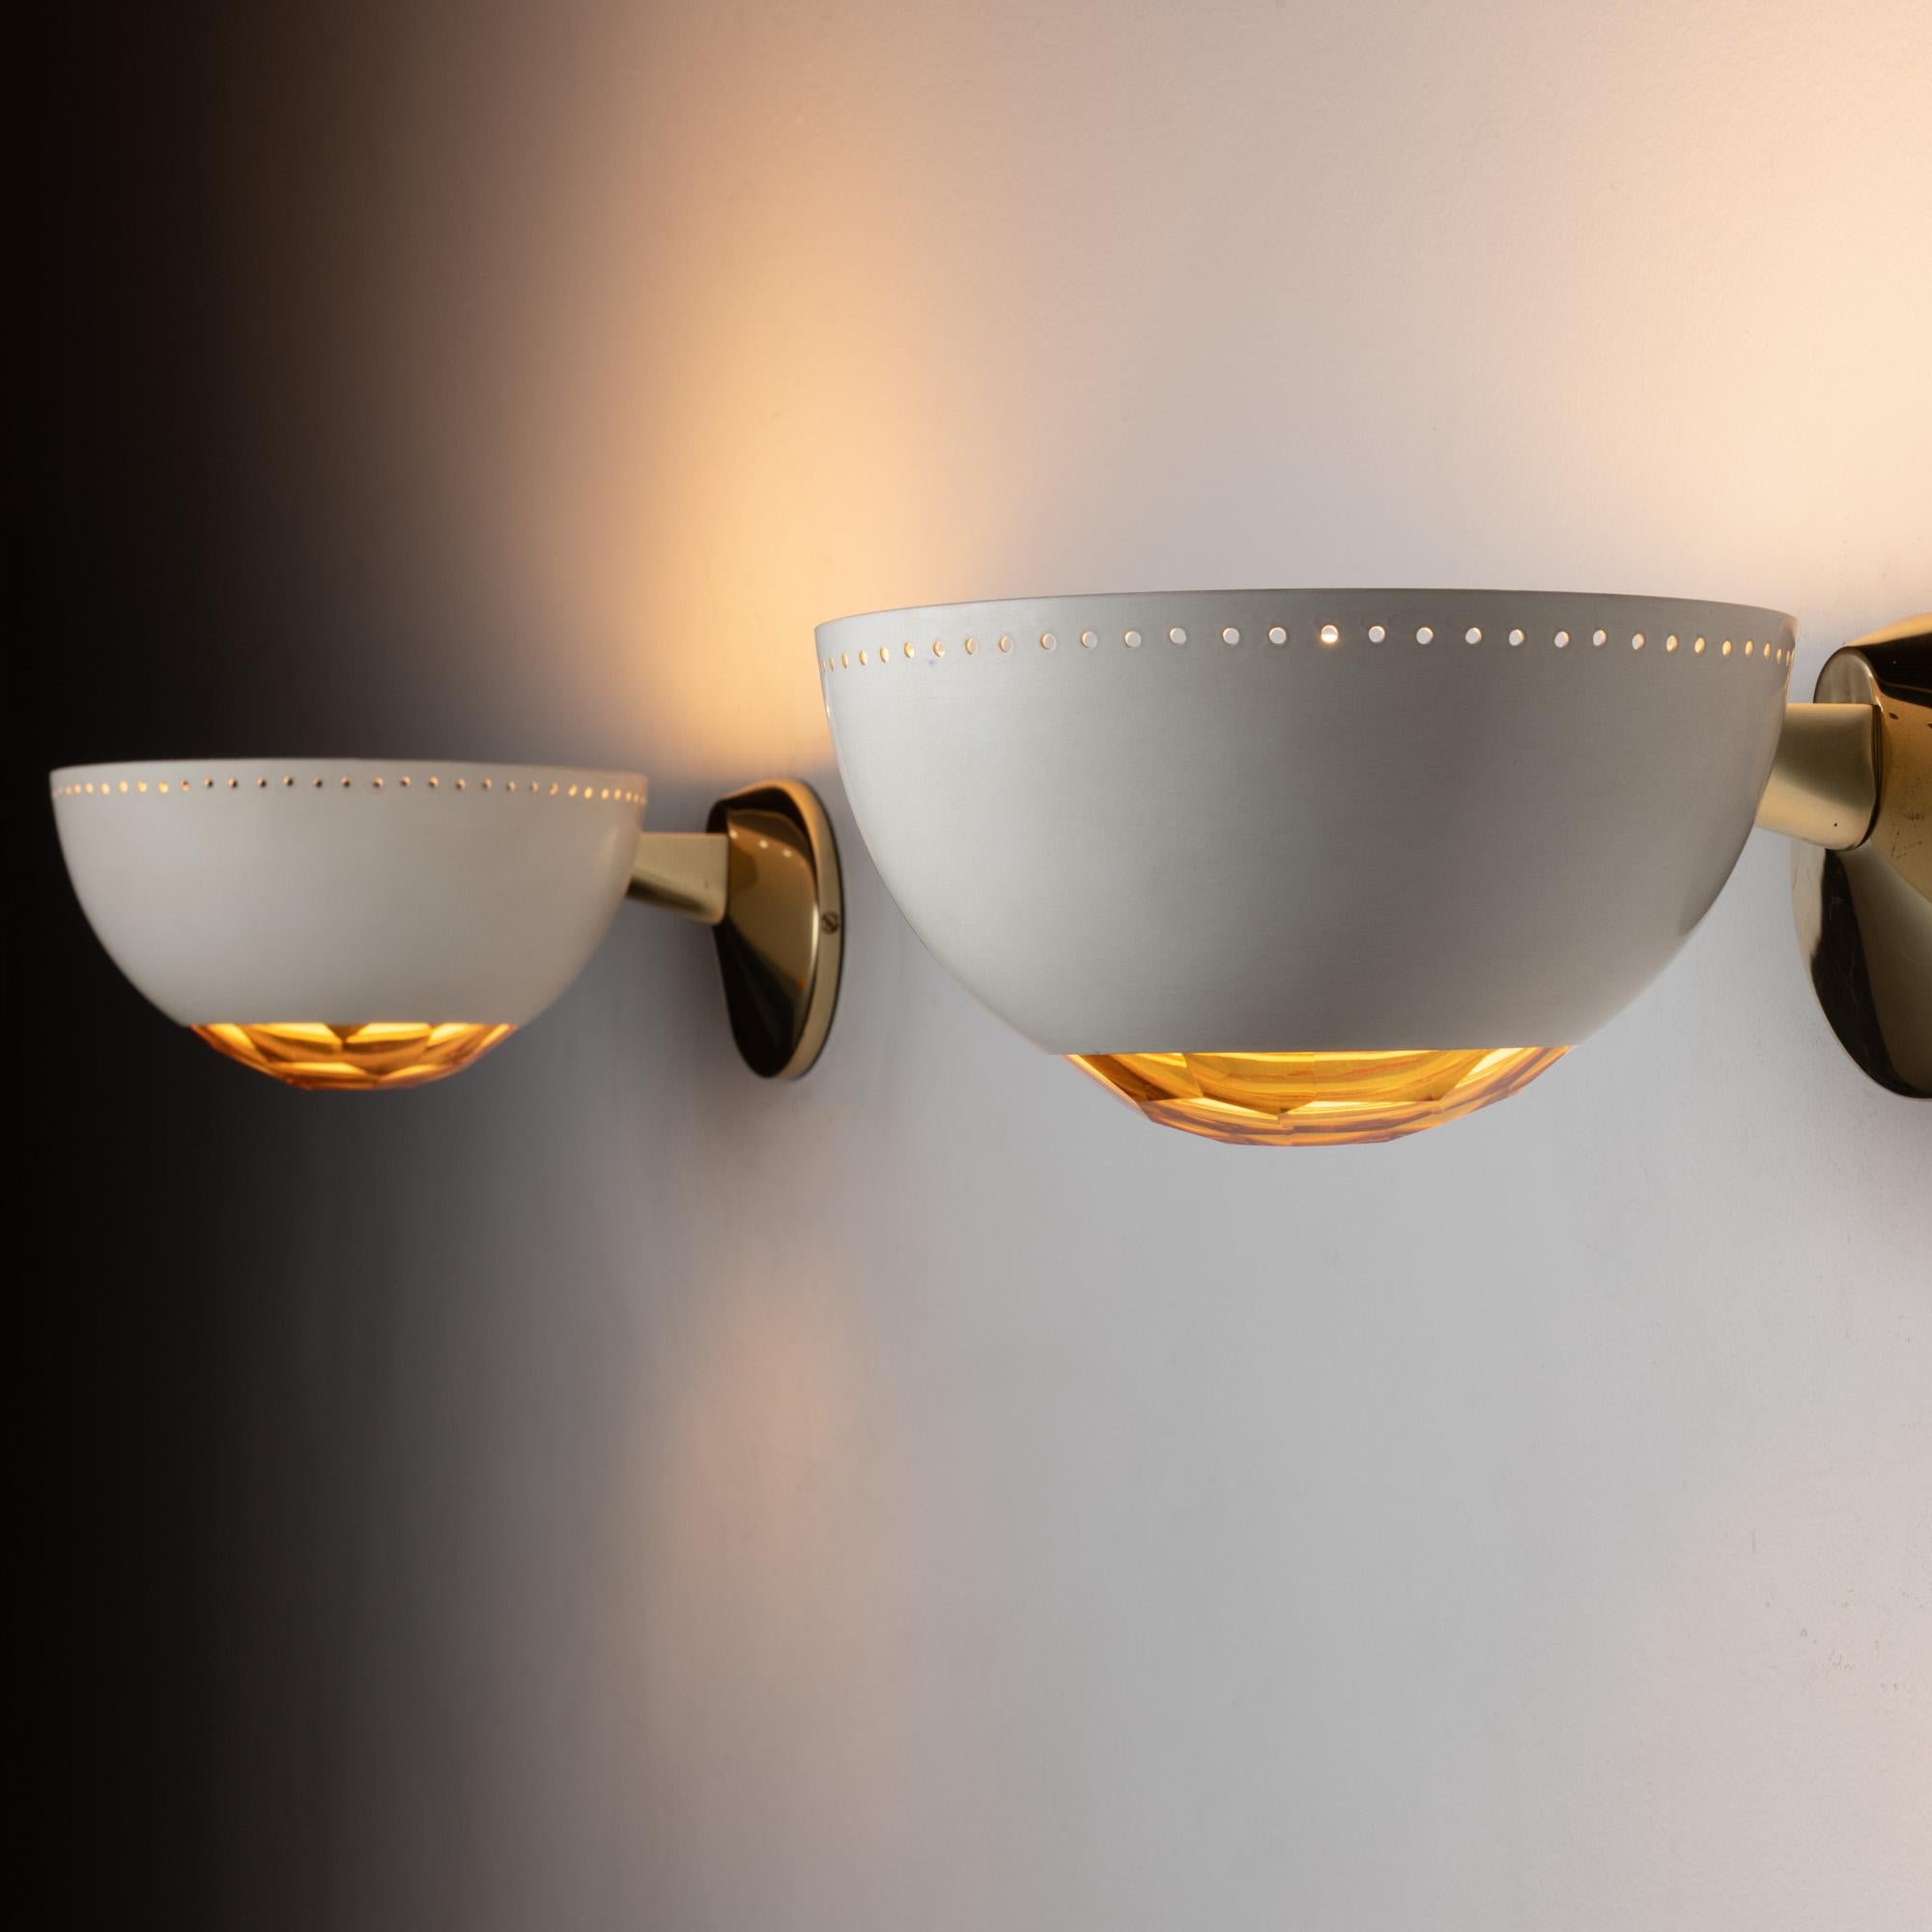 Pair of Lumi sconces. Designed and manufactured in Milan, Italy circa 1950's. Enameled, glass, metal, brass. Rewired for U.S. standards. We recommend one E26 60w maximum bulb per fixture. Bulbs not included.